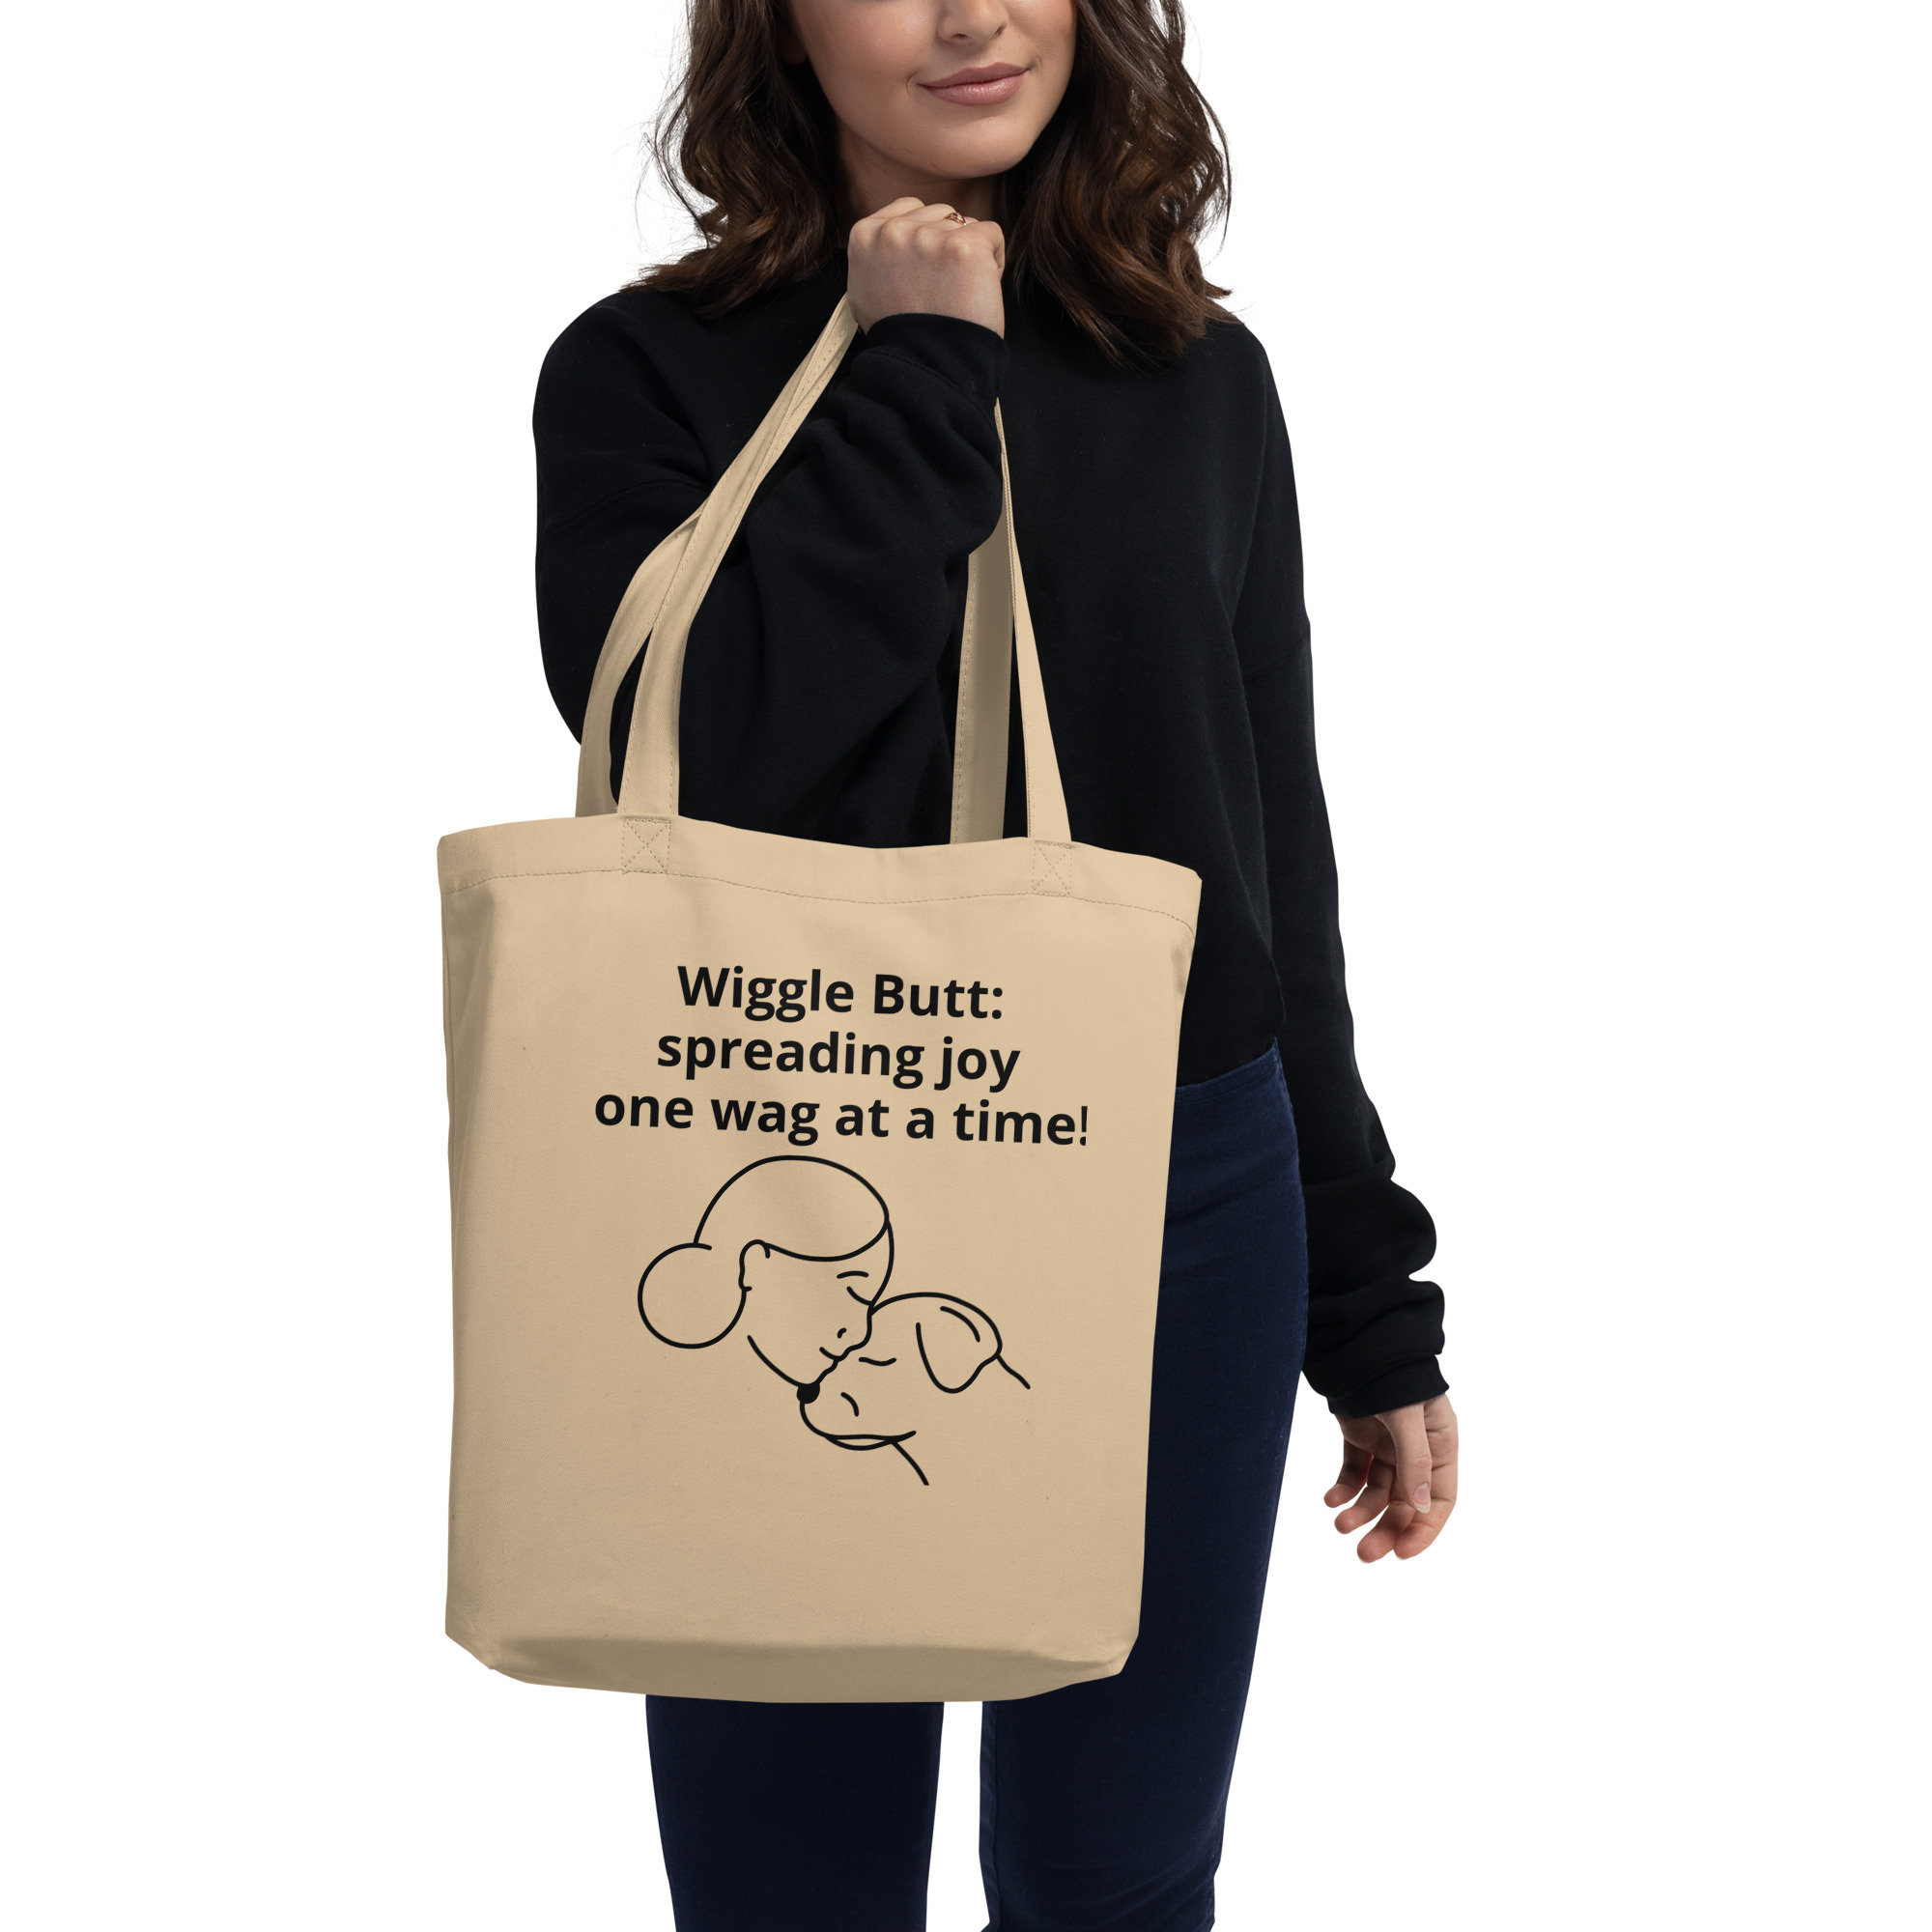 Wiggles Overnight Bag | Wiggles Overnight Bag available from… | Flickr